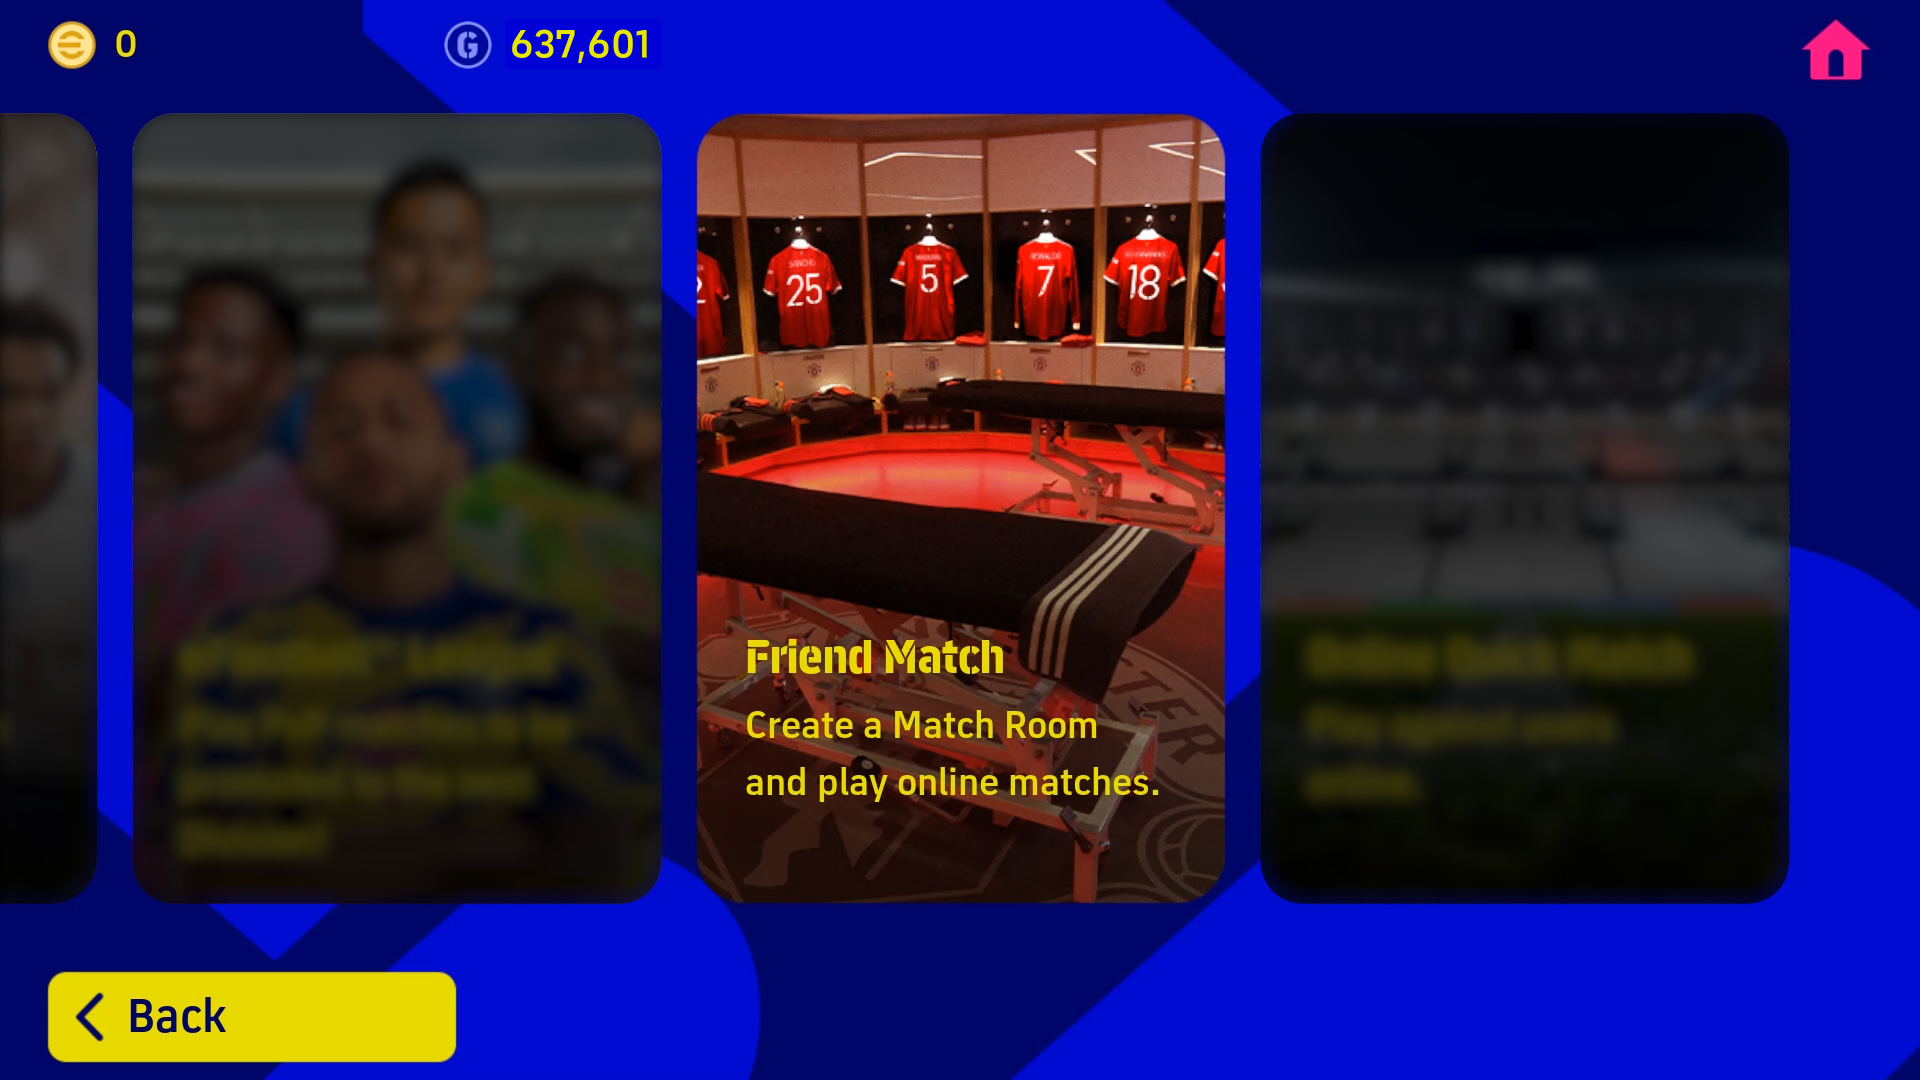 friend match en eFootball 2022: Konami rolls out the v1.1.4 update for the mobile game